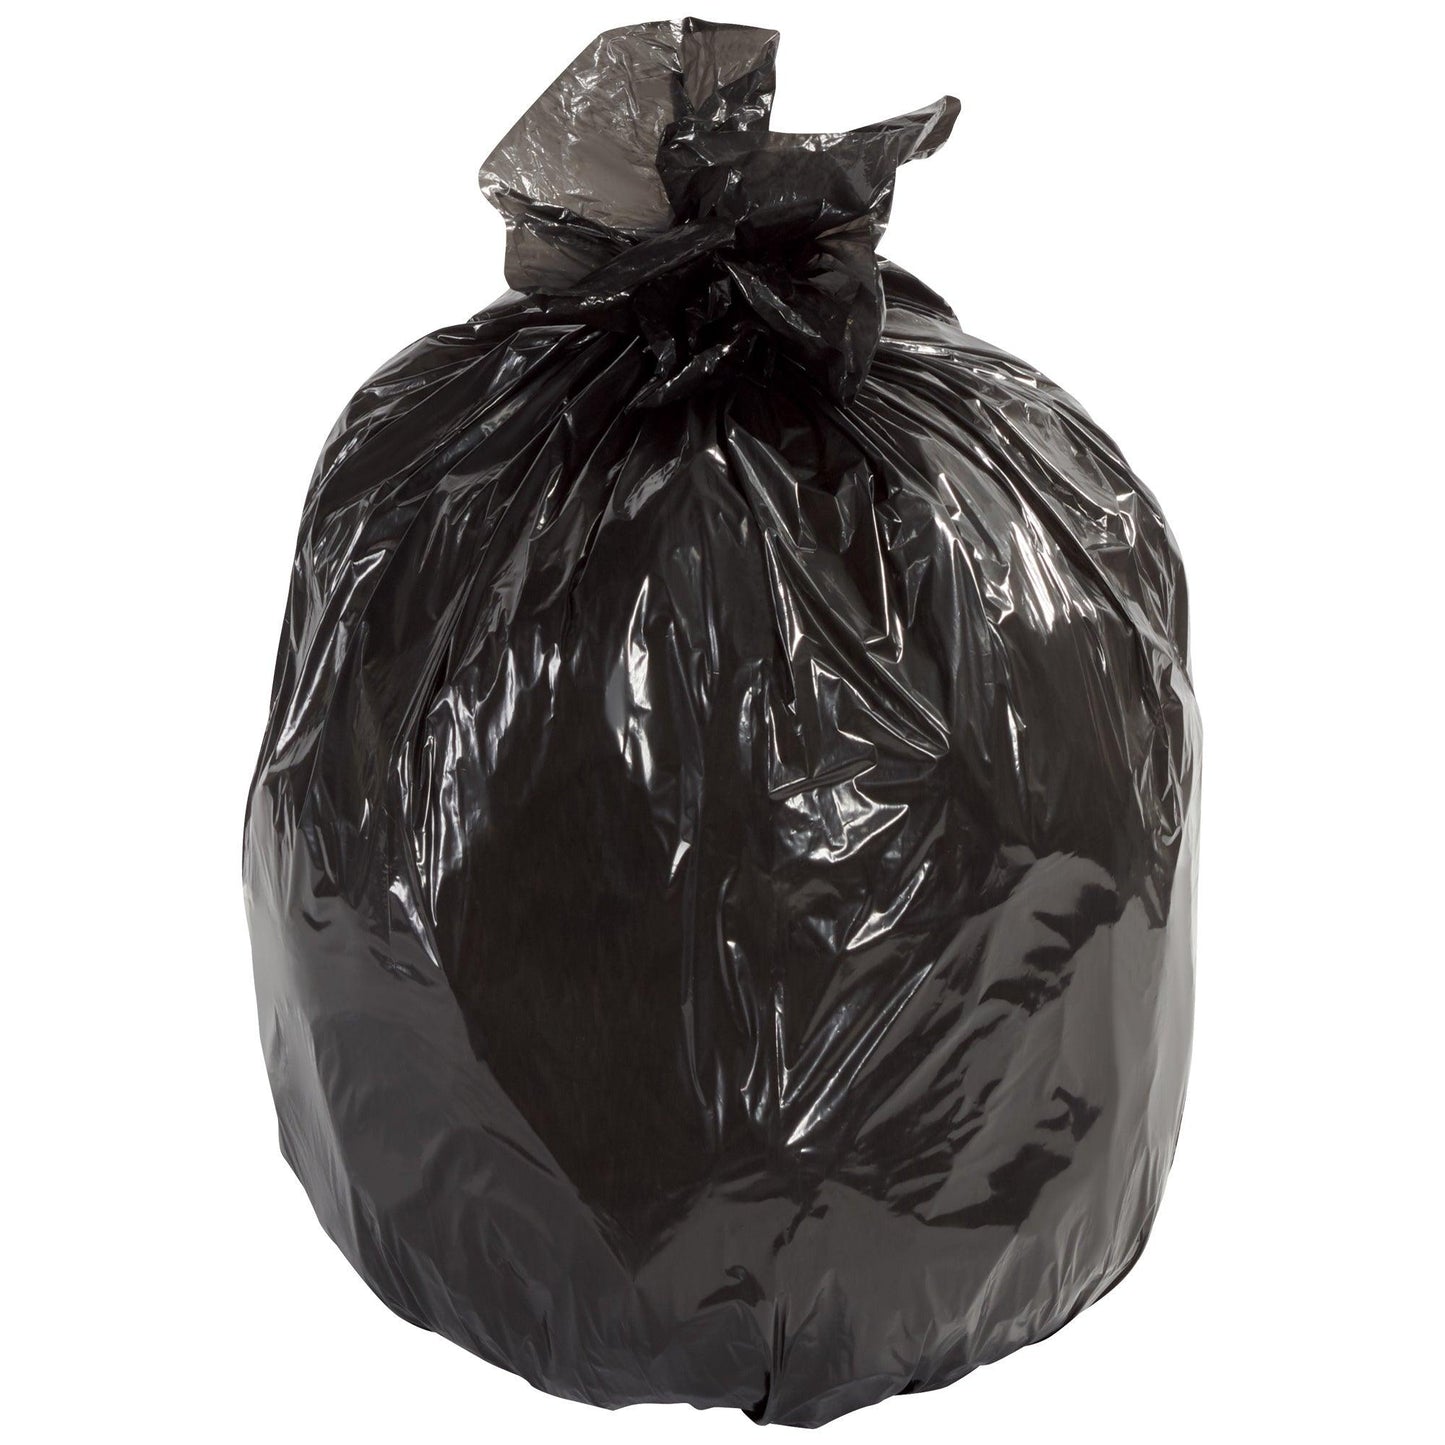 Second Chance Trash Liners - Black, 20 - 30 Gallon, 1.1 Mil., Flat Pack - CL5003